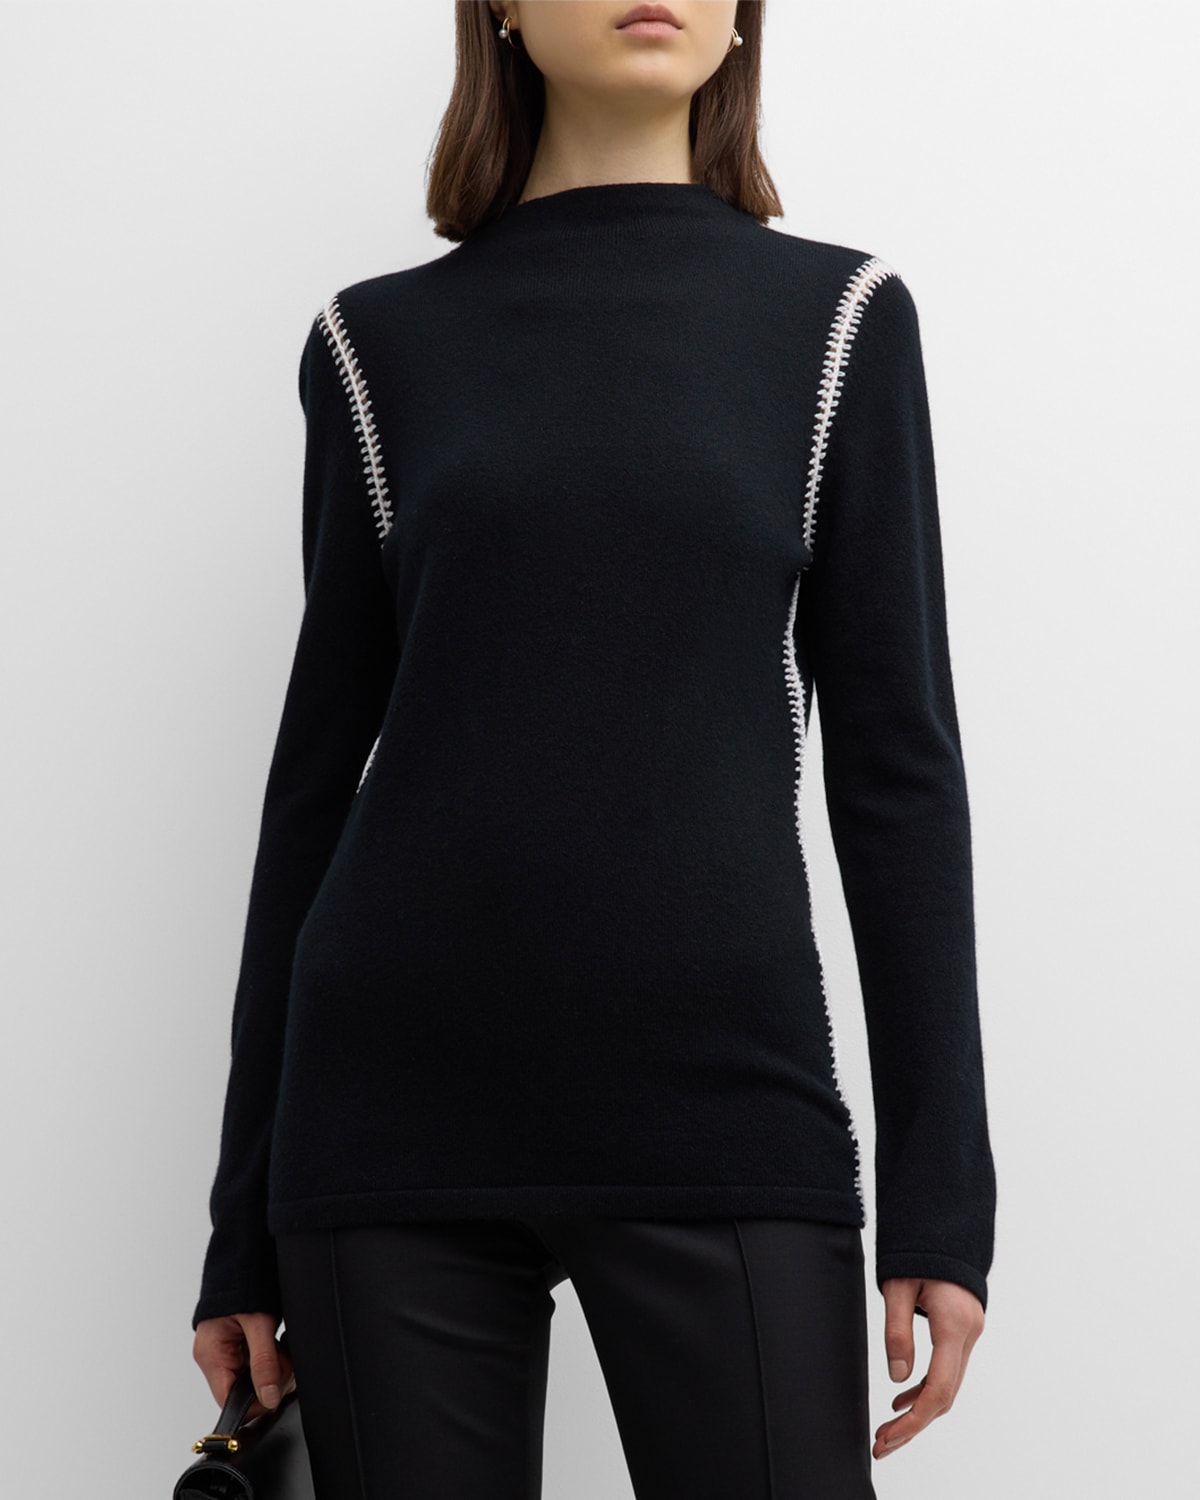 Cashmere Mock Neck Sweater with Whipstitch Detailing